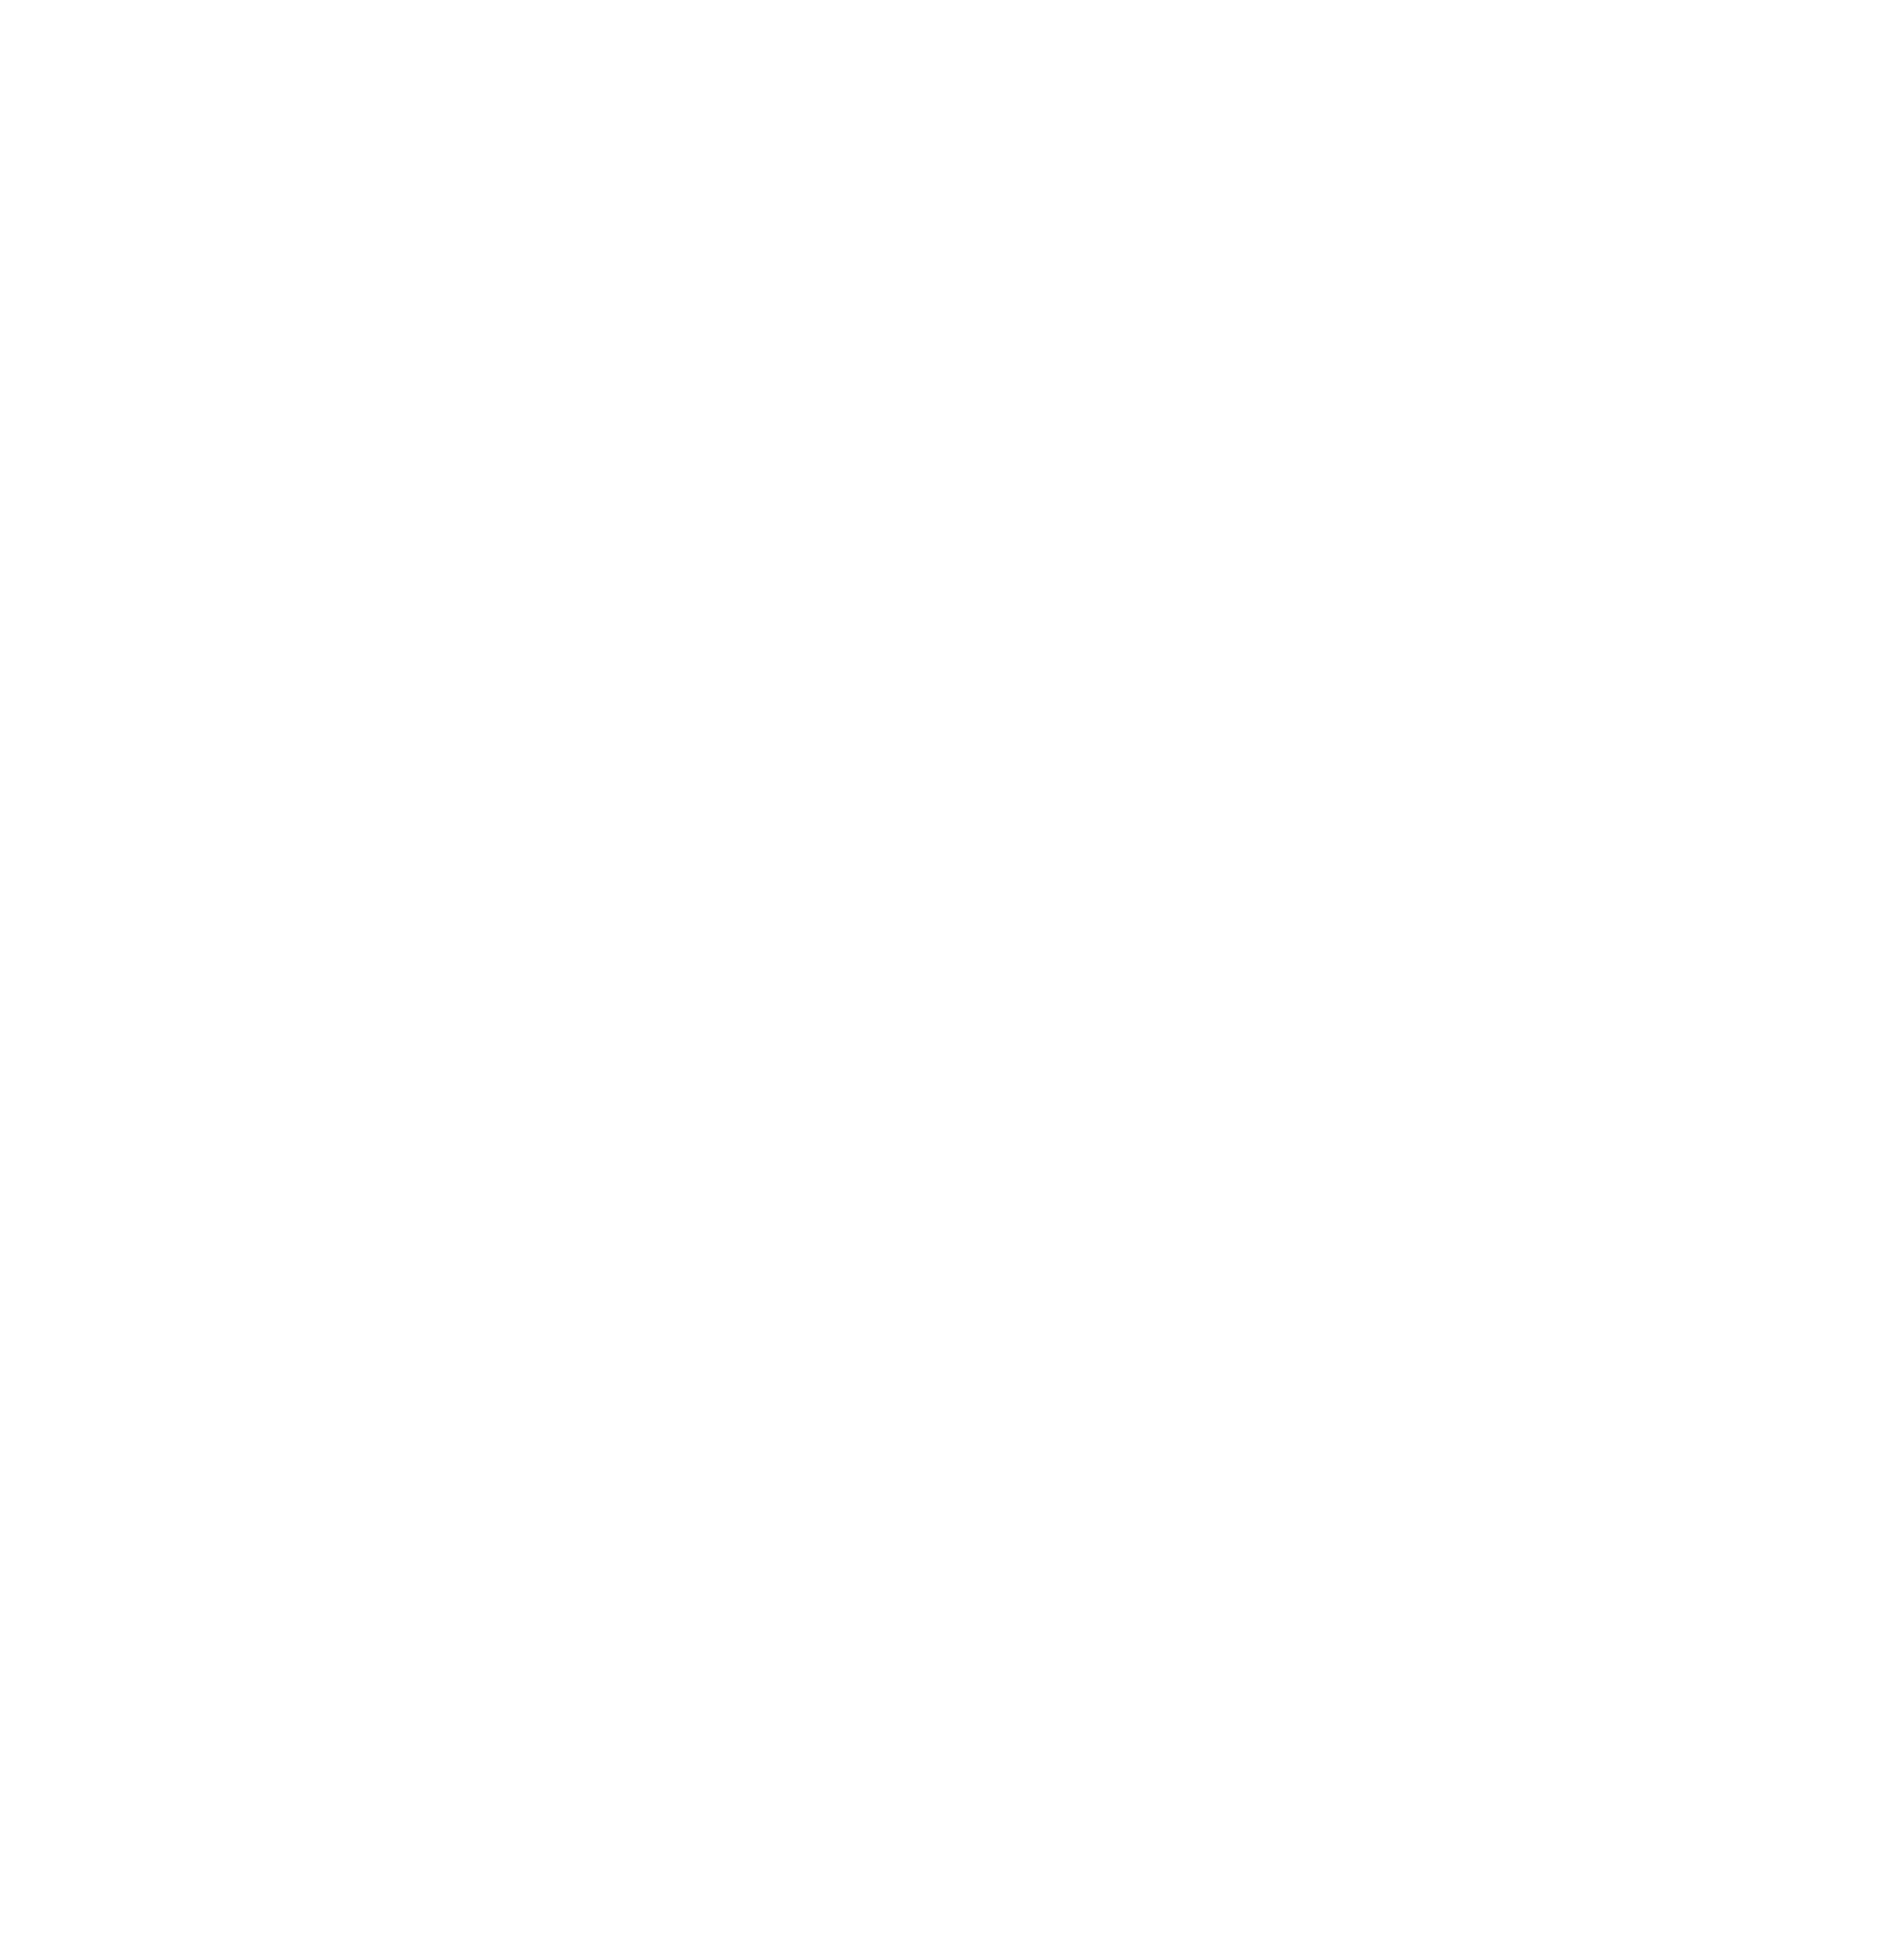 SUSTAINABLE AND POSITIVE LYOCELL:70% COTTON:30%